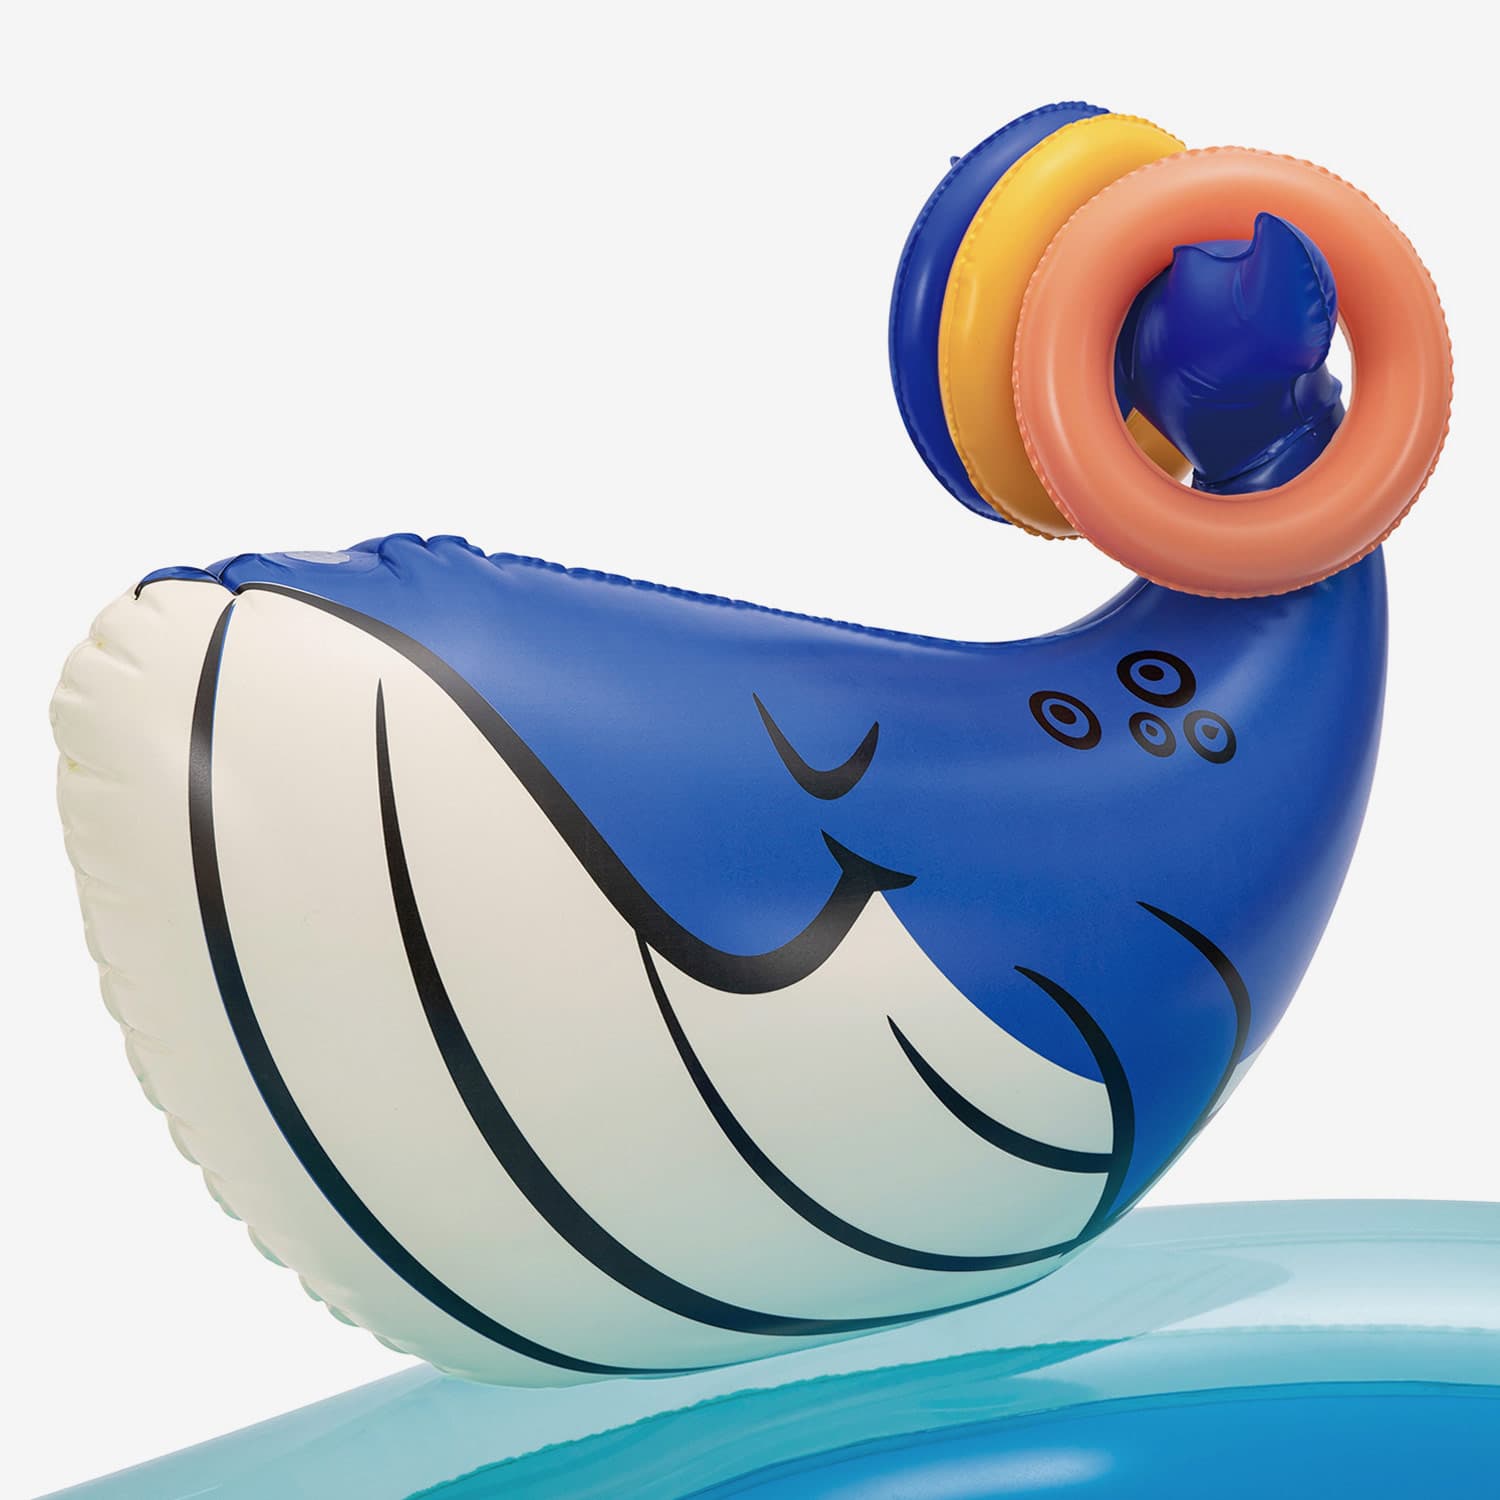 Funsicle Whale Kingdom Playcenter close up view